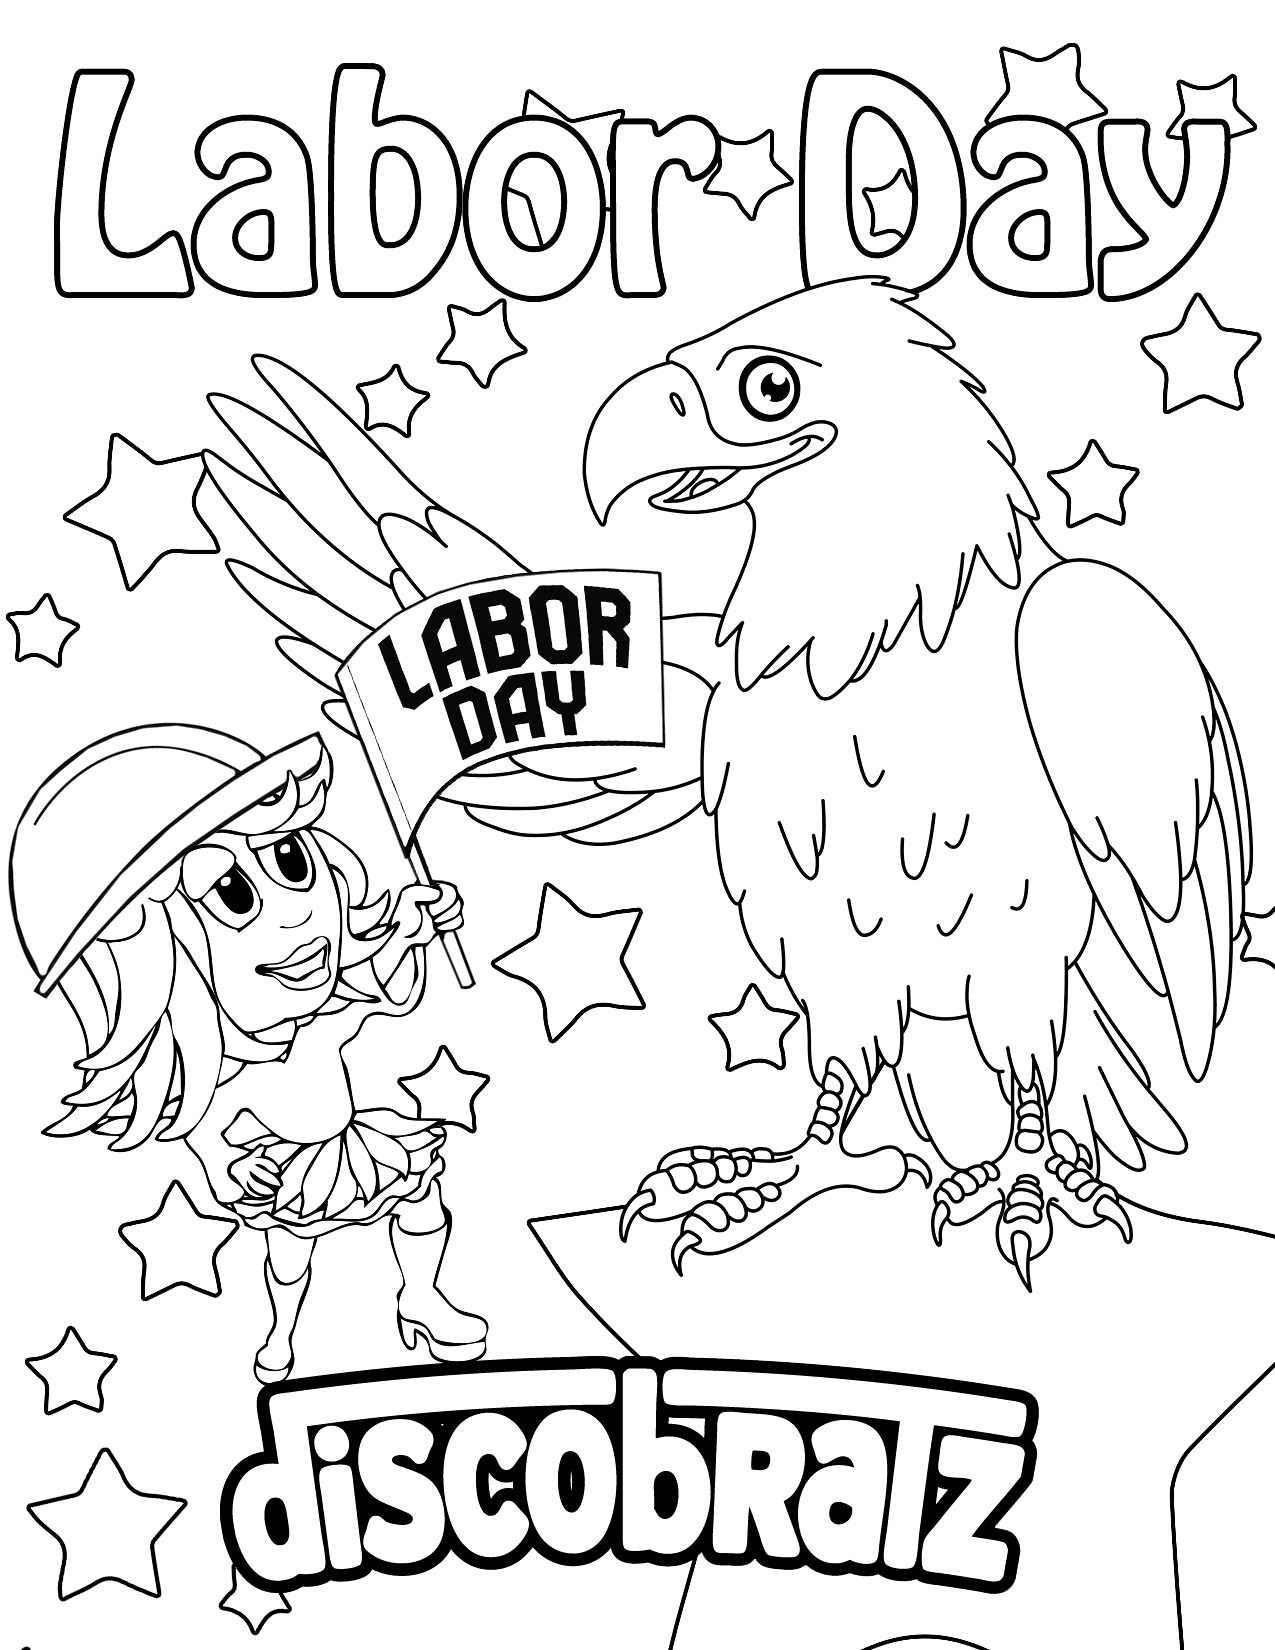 labor-day-coloring-pages-free-printable-printable-word-searches